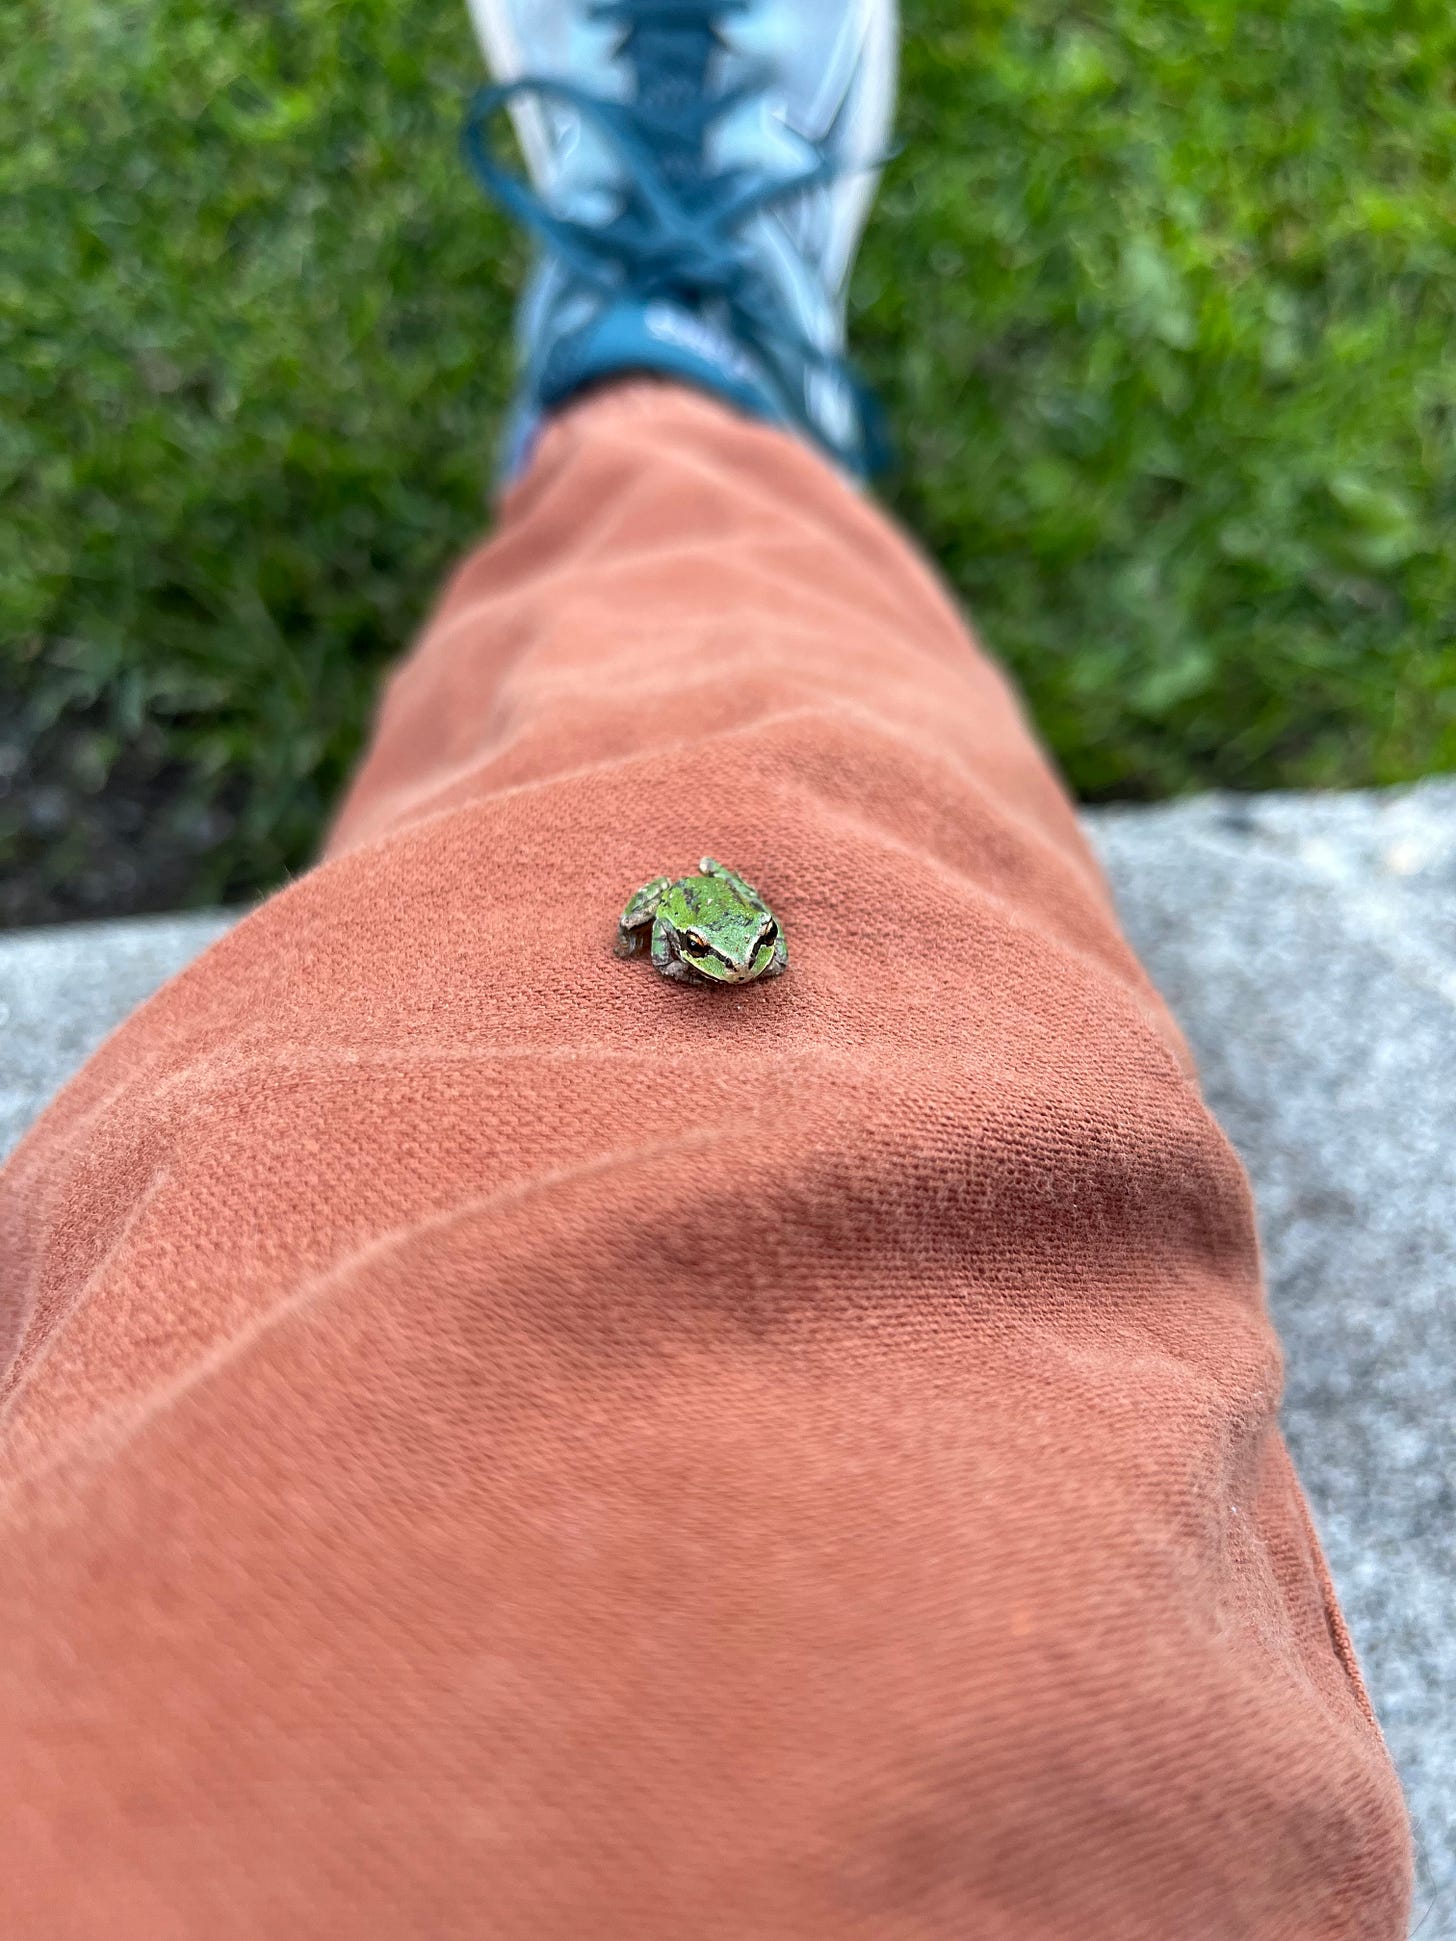 A quarter-sized frog with brown markings sits contentedly on Lindsey's outstretched leg, clad in a terracotta-colored denim. Her foot is stretched out in front of her onto a lawn but is not in focus.